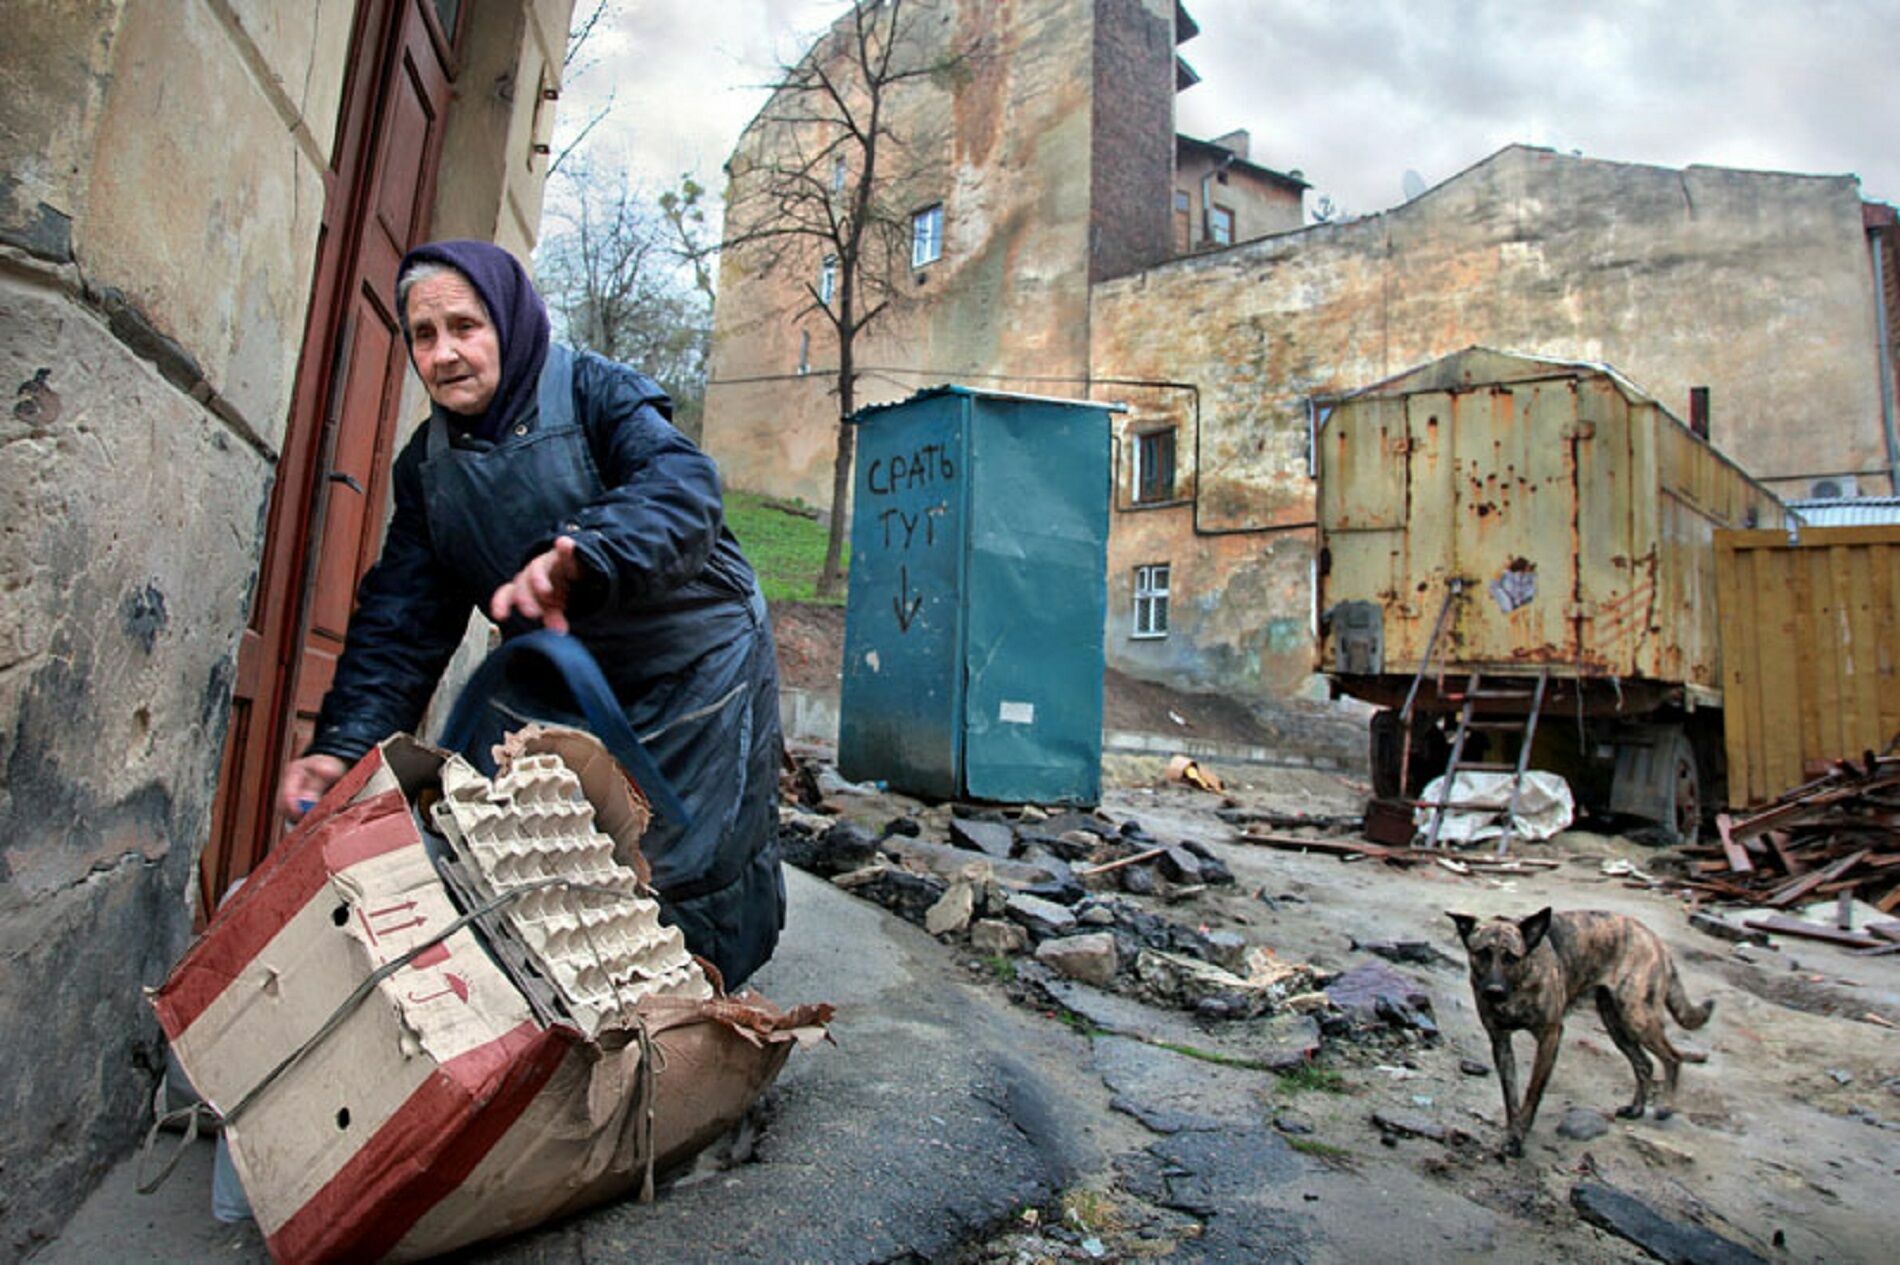 From poverty to misery. What the Russian economy will be after covid